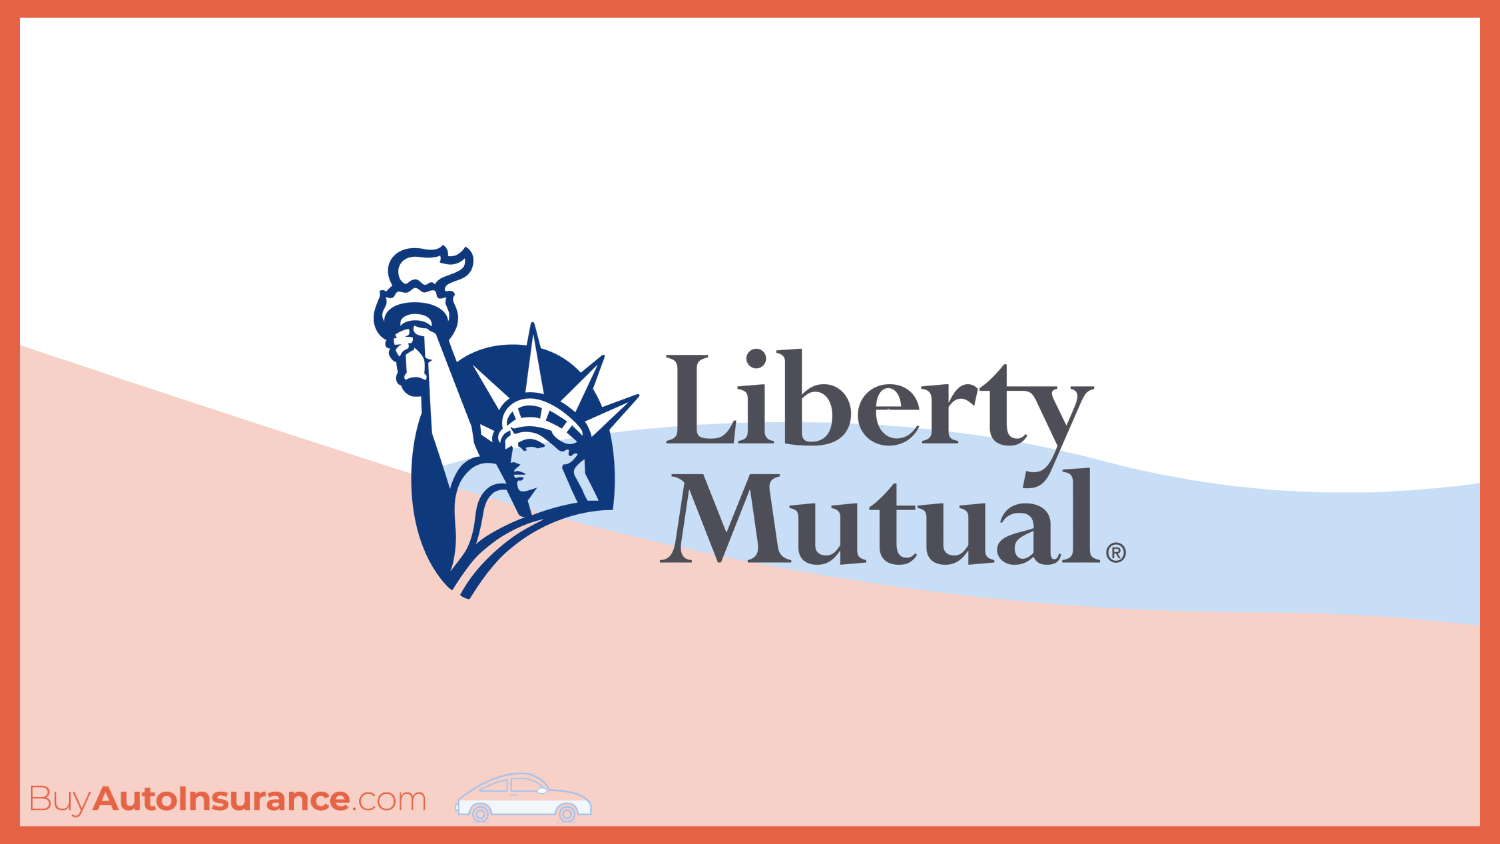 Cheap Auto Insurance Companies That Don't Monitor Your Driving: Liberty Mutual